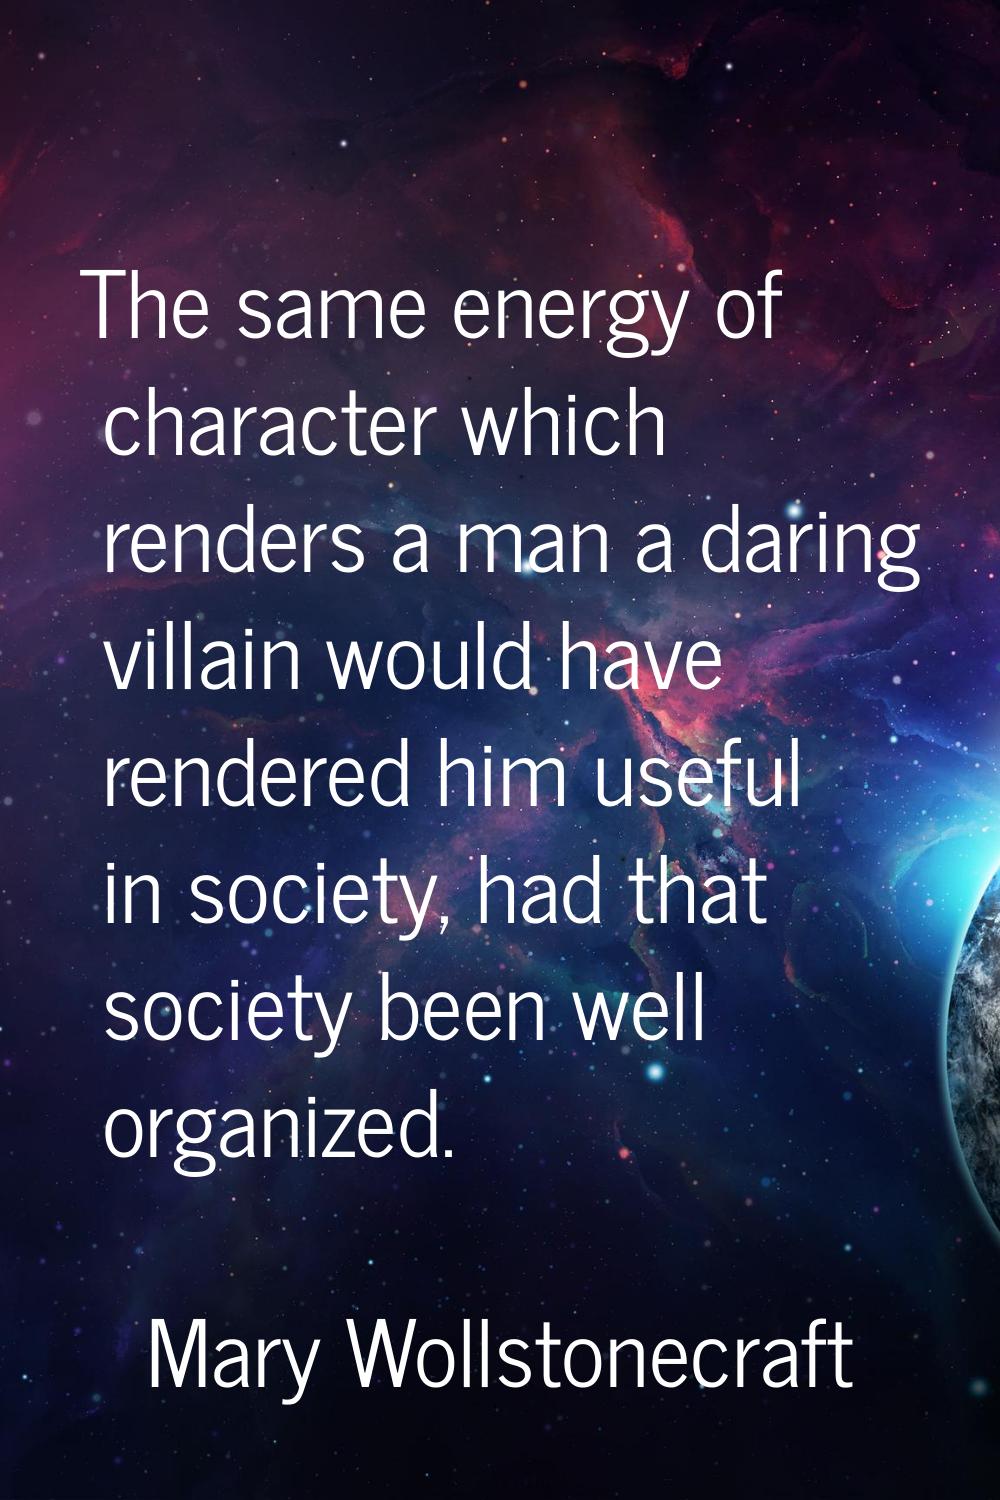 The same energy of character which renders a man a daring villain would have rendered him useful in